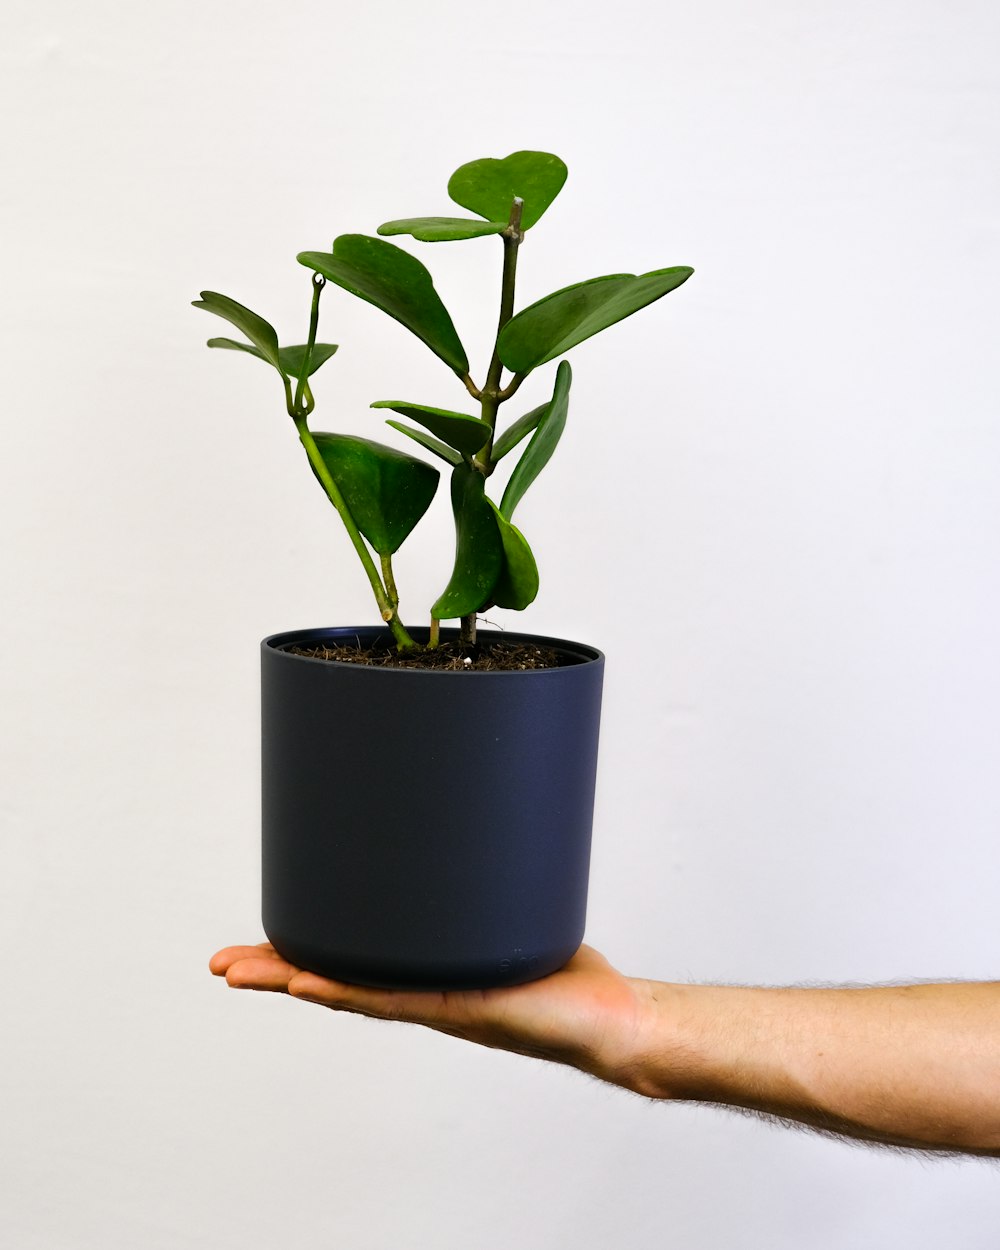 a person's hand holding a small potted plant